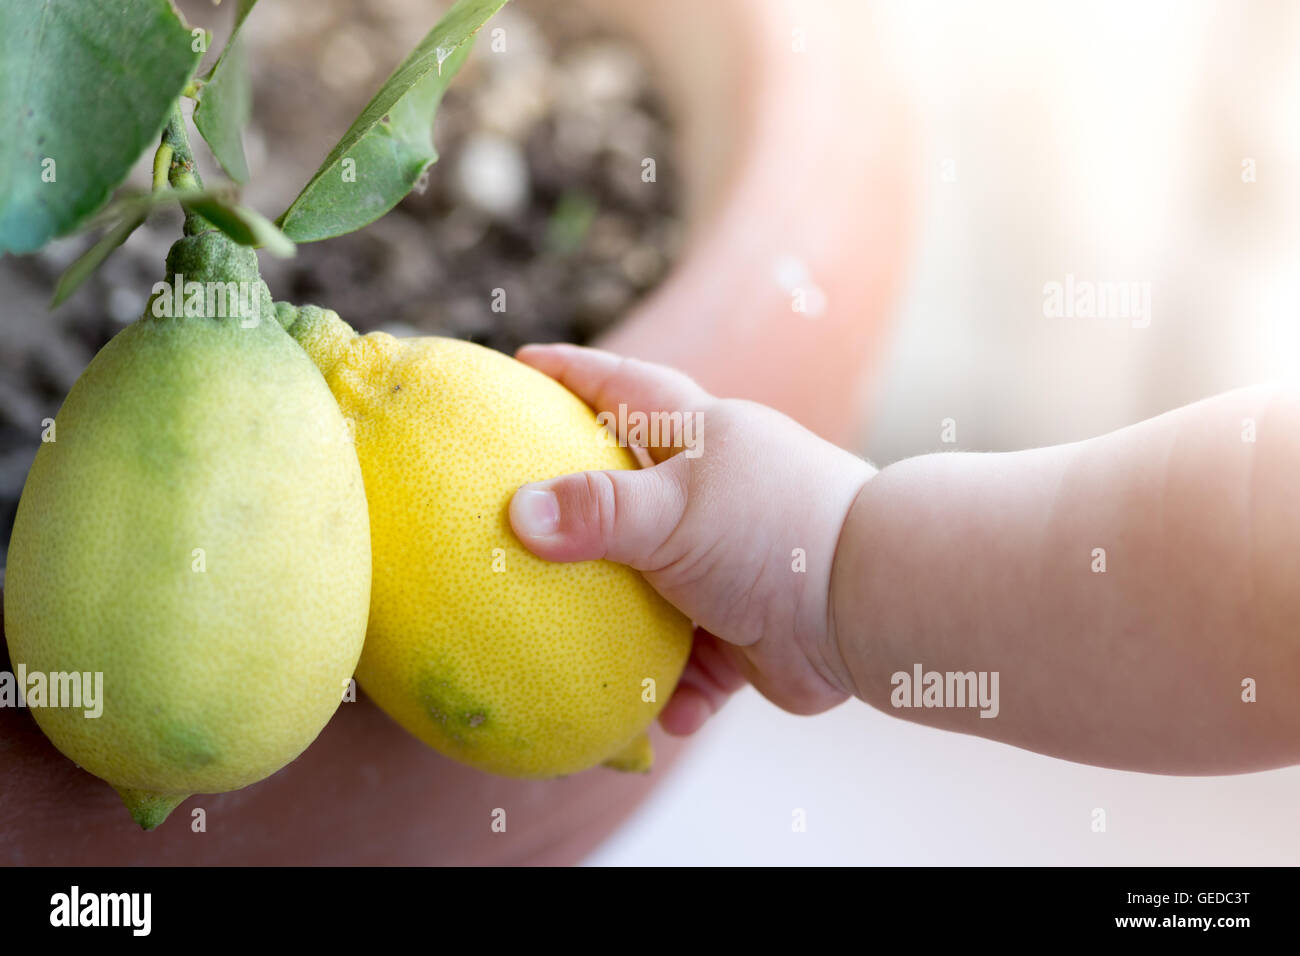 Cute baby touching some lemons, discover Nature Stock Photo